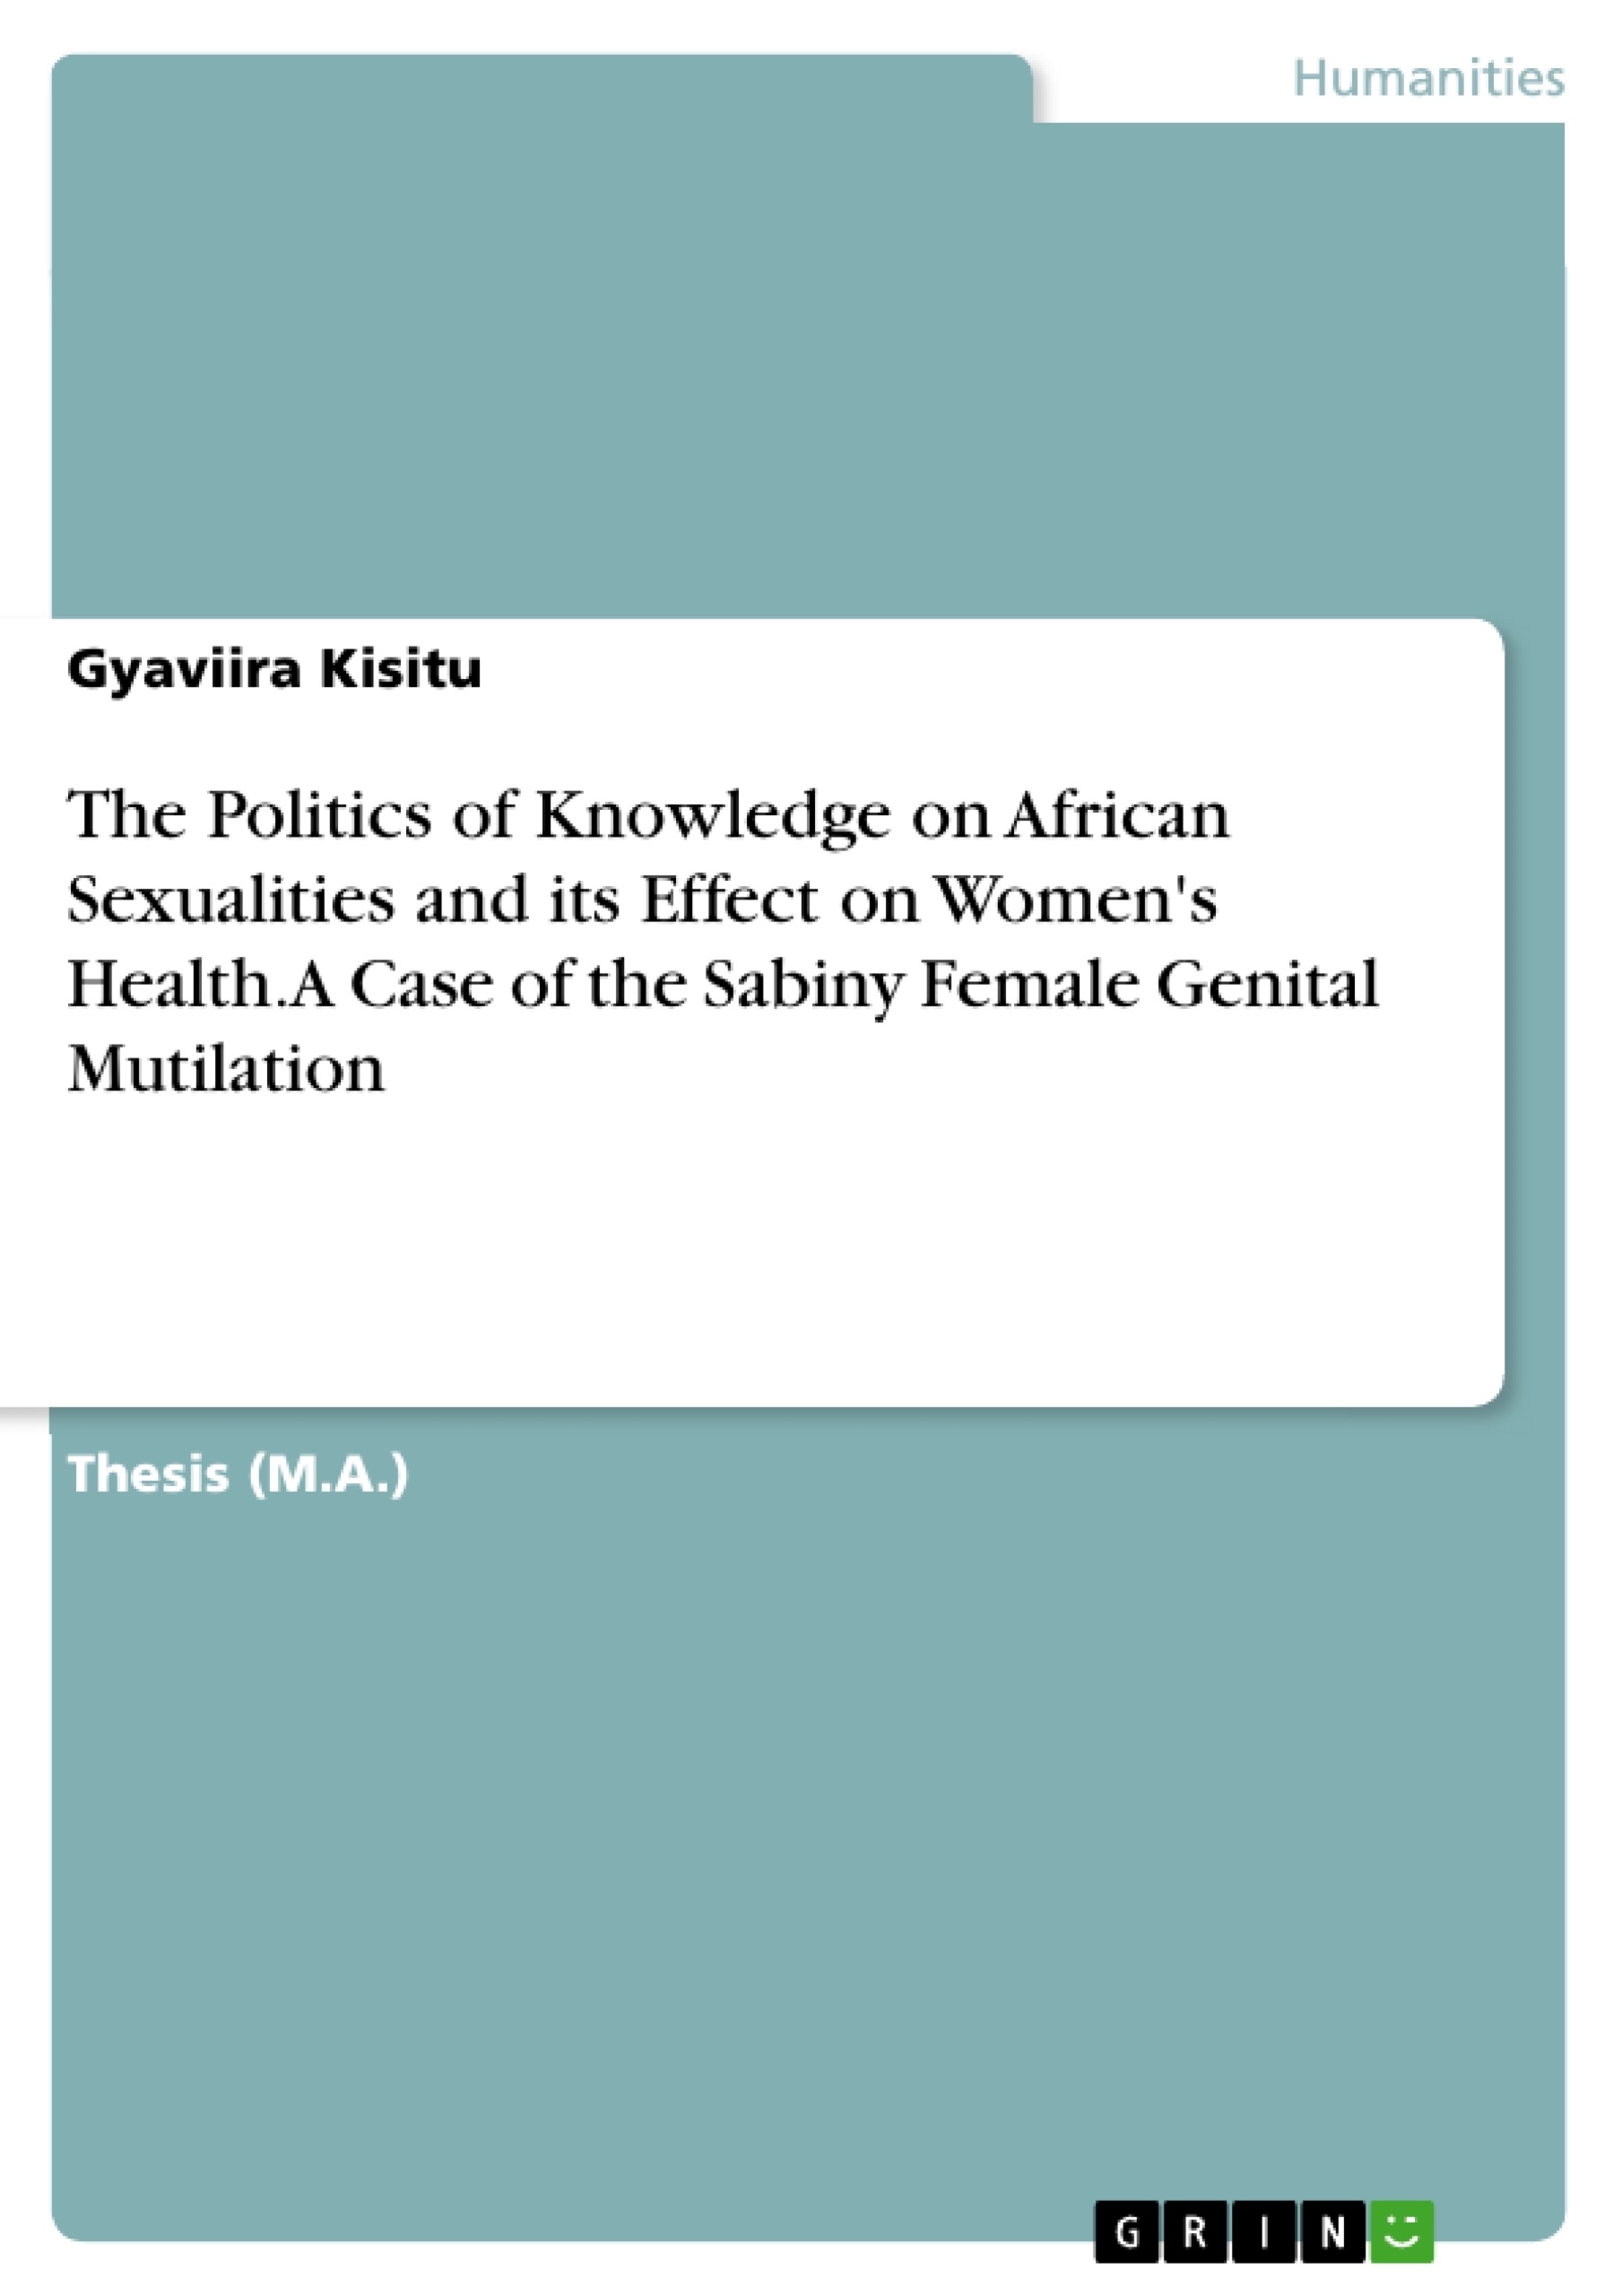 Title: The Politics of Knowledge on African Sexualities and its Effect on Women's Health. A Case of the Sabiny Female Genital Mutilation